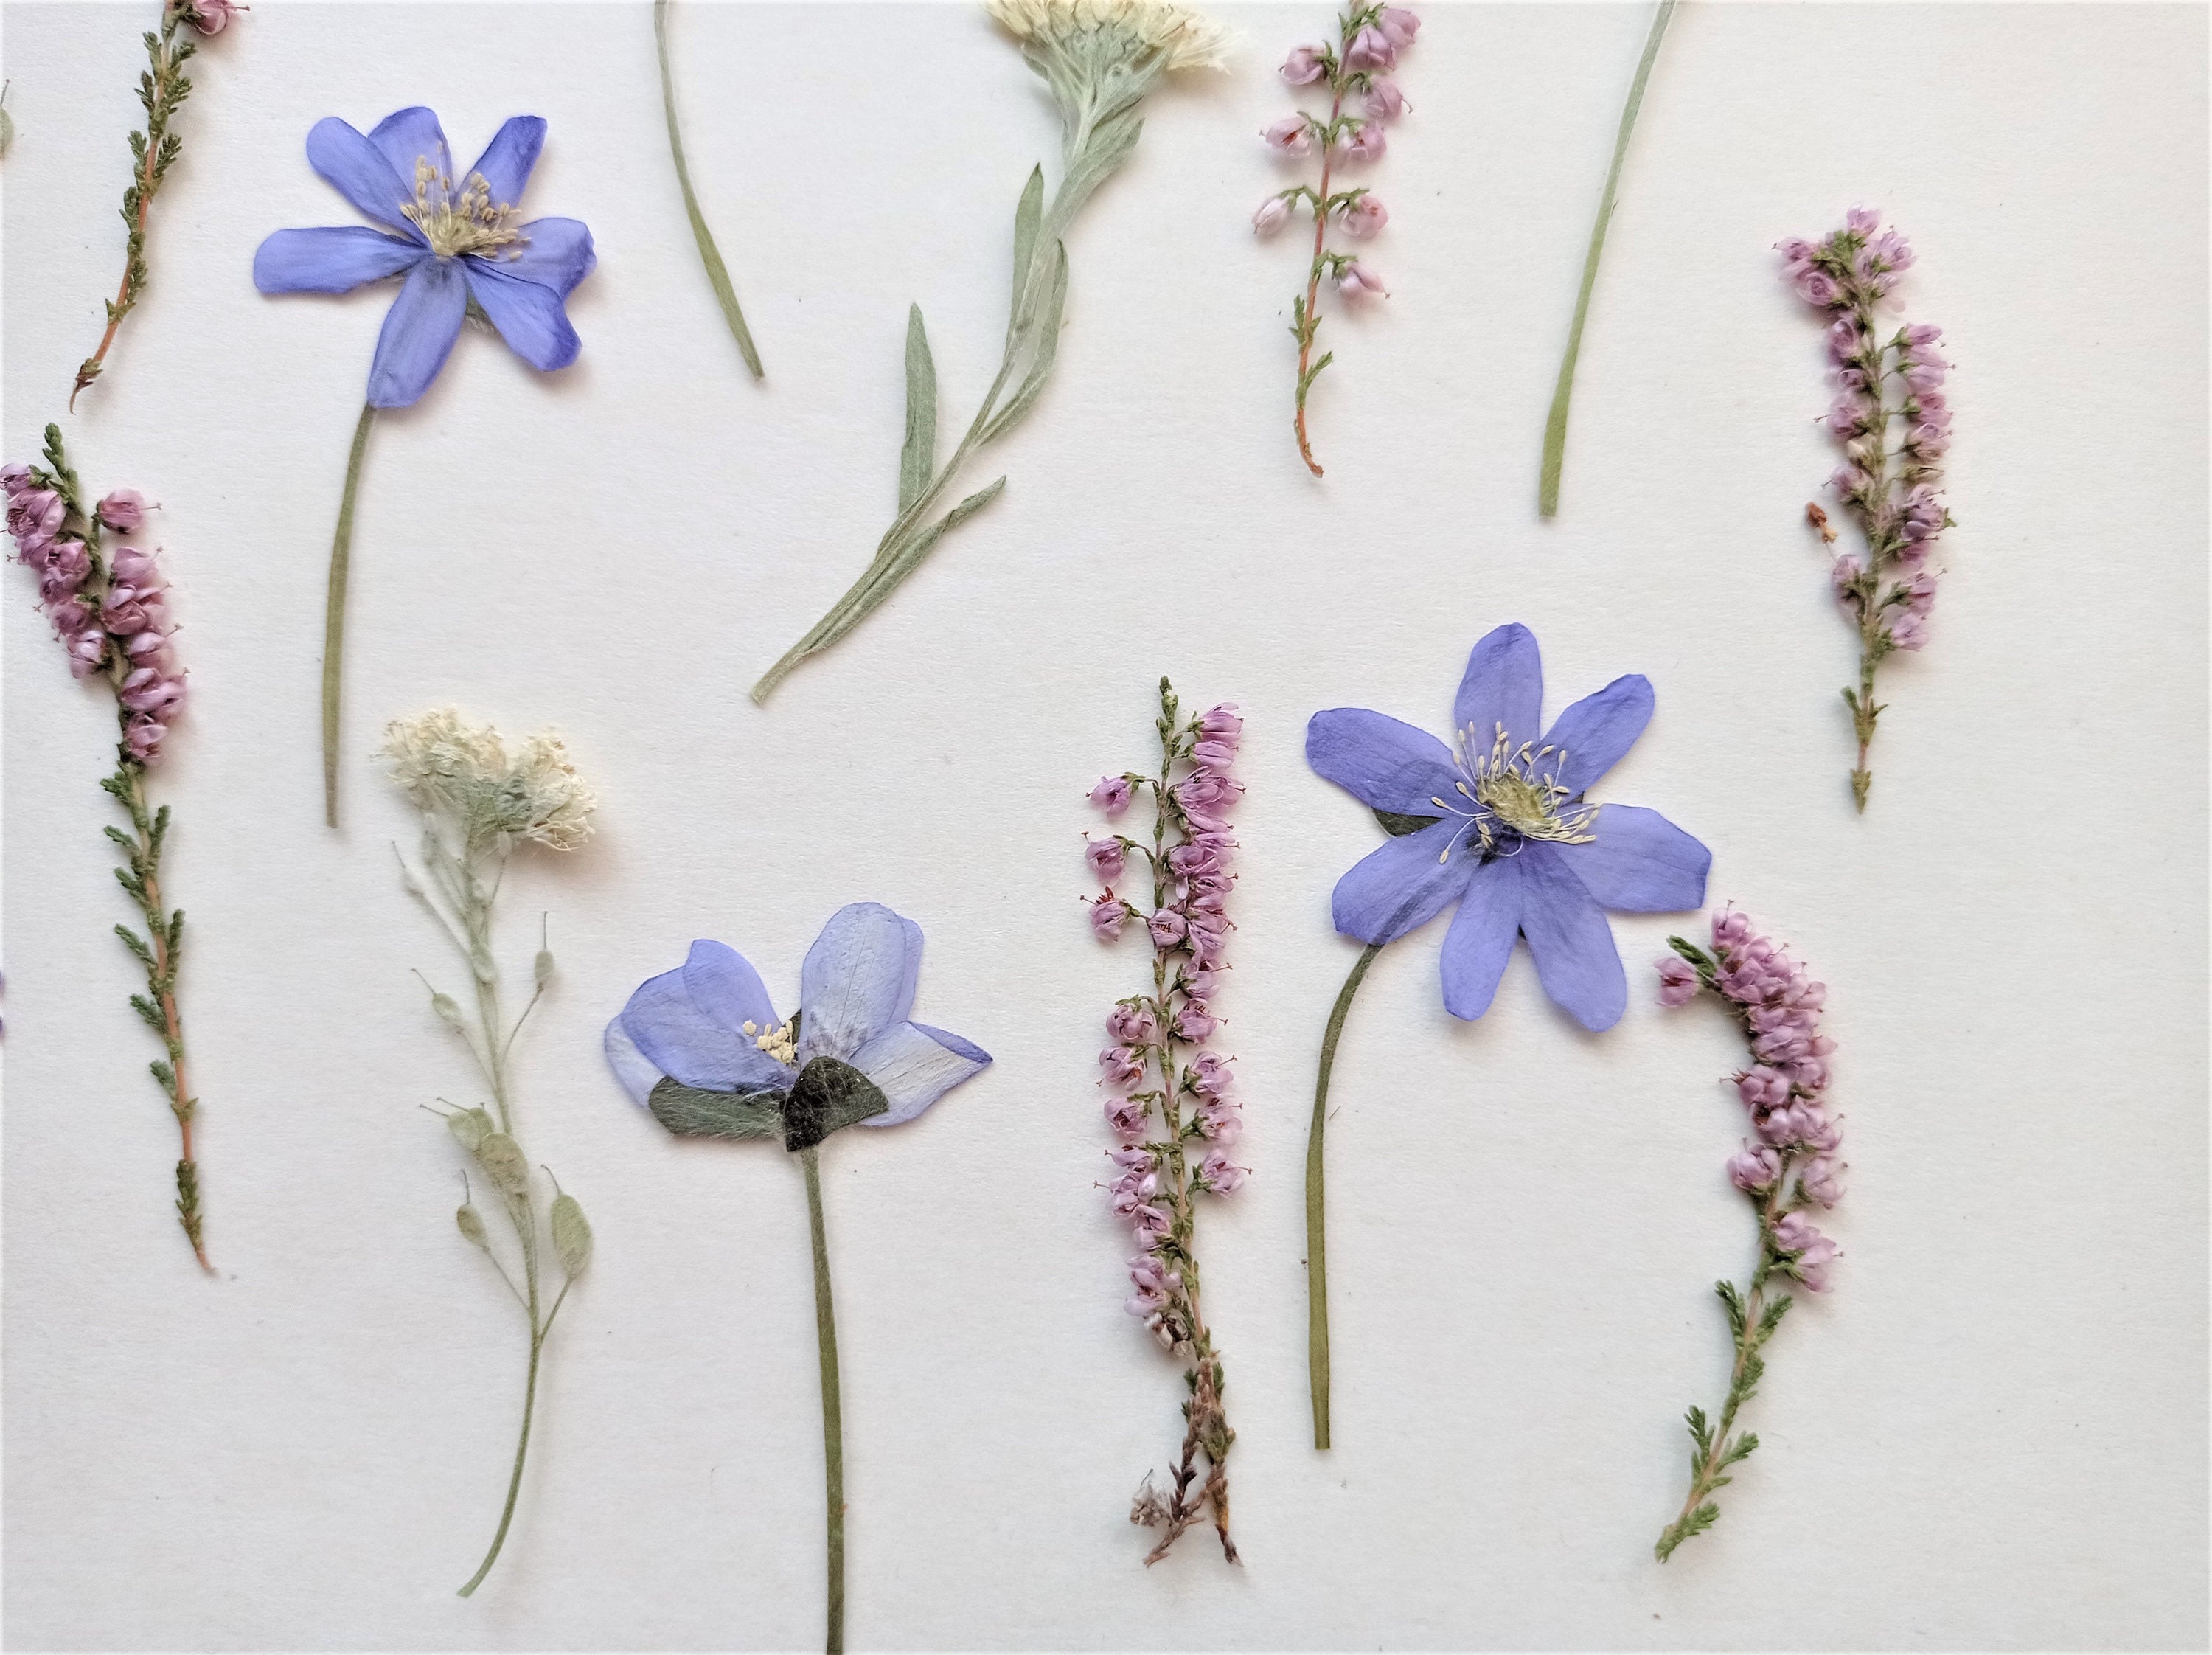 ODDAVA Dried Pressed Flowers 170+ Pcs Mixed Dried Flowers for